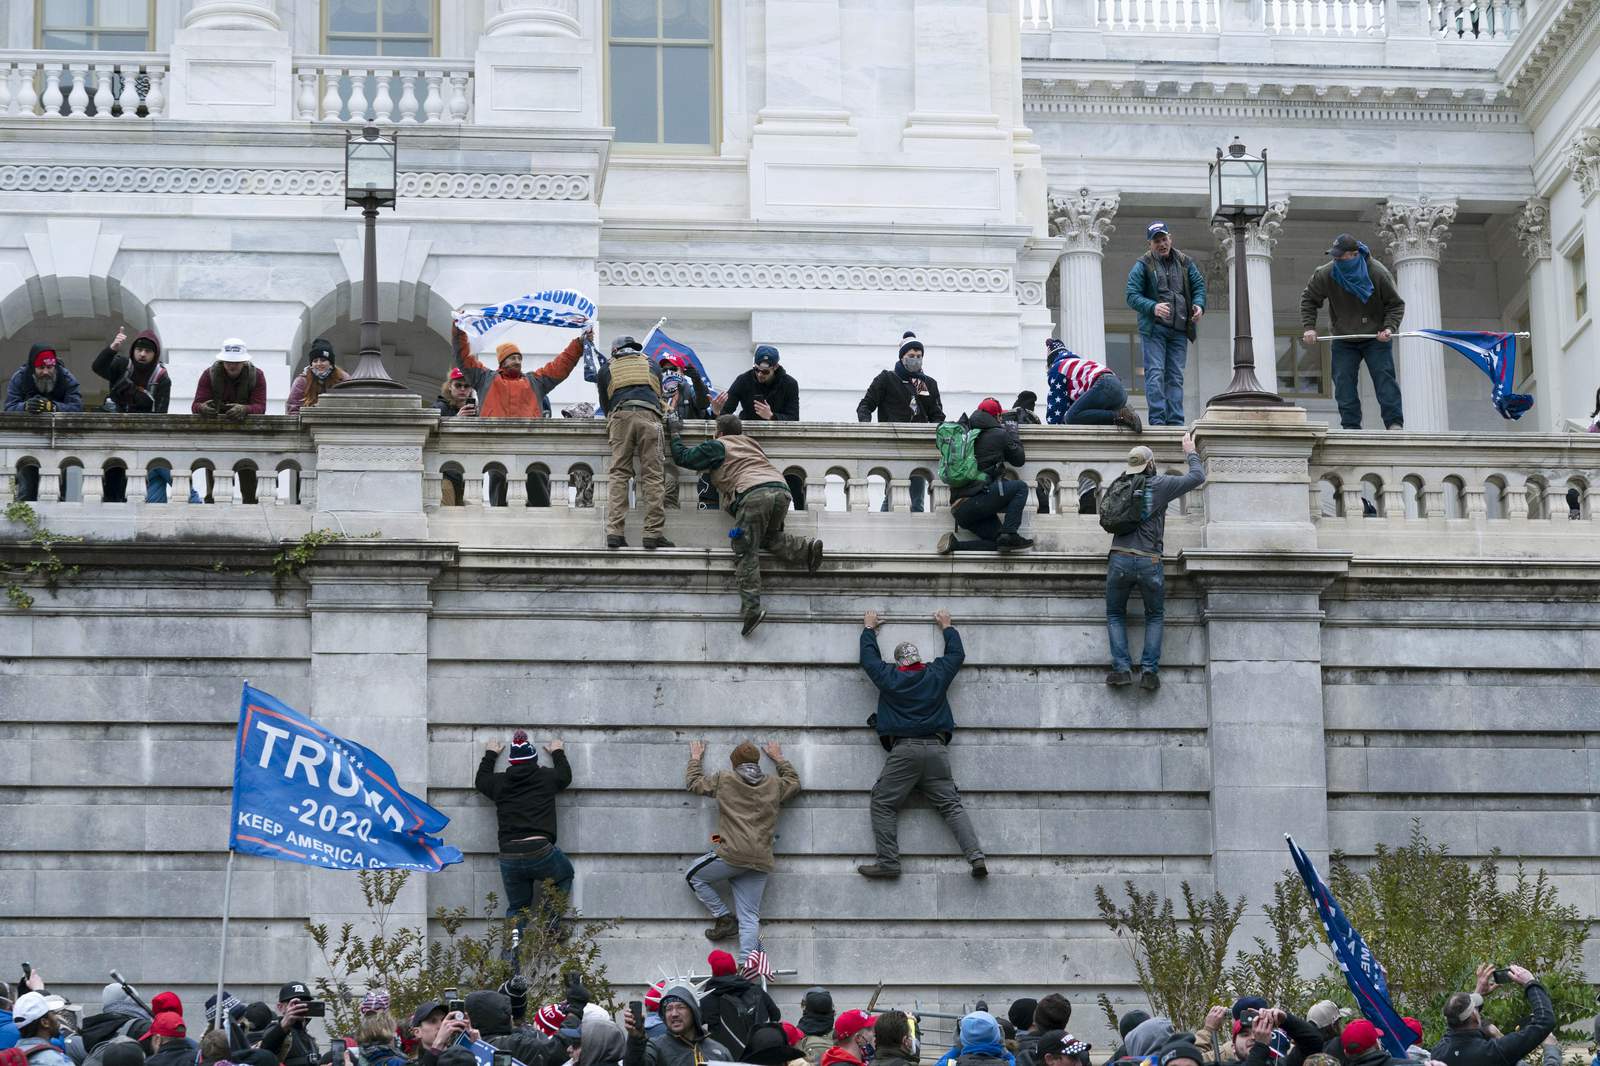 PHOTOS: This is what it looked like as protesters stormed the US Capitol